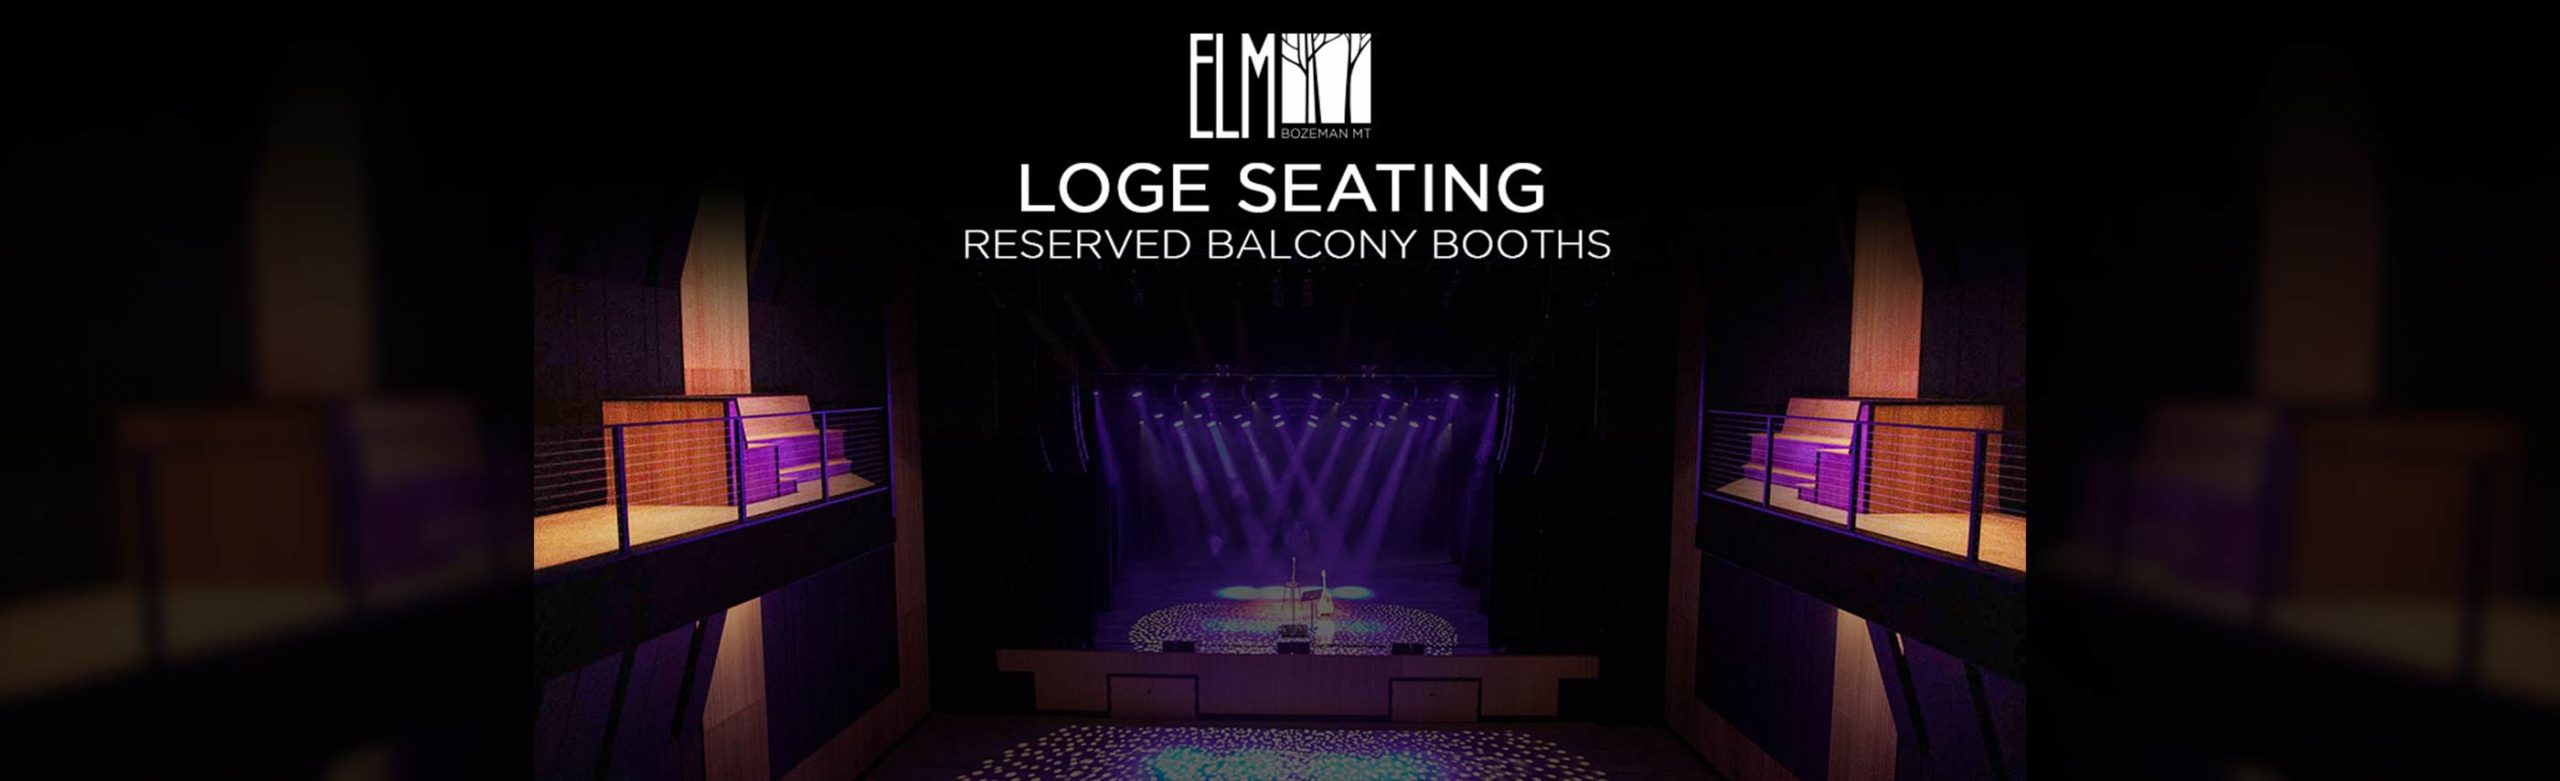 NOW AVAILABLE: Loge Seating at The ELM Image